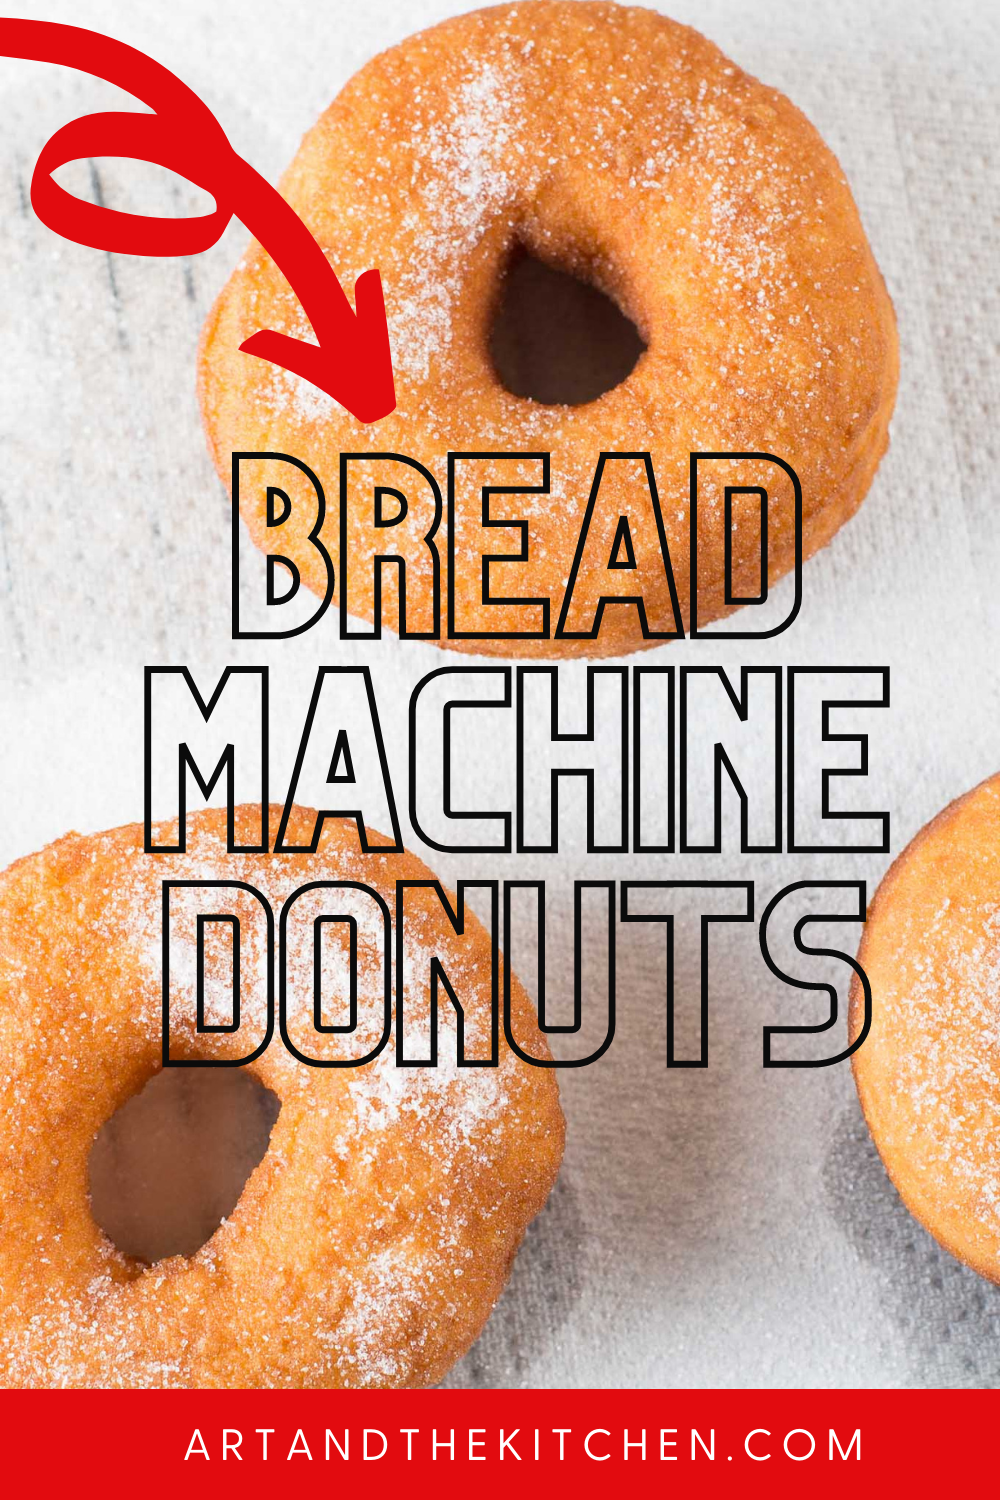 Easy Bread Machine Donuts are light and fluffy just like the ones from your favourite bakery. Sprinkle with plain white sugar, icing sugar, dip in chocolate or decorate with frosting and sprinkles. It is time to pull out that bread machine and whip up a batch of yummy homemade donuts! via @artandthekitch